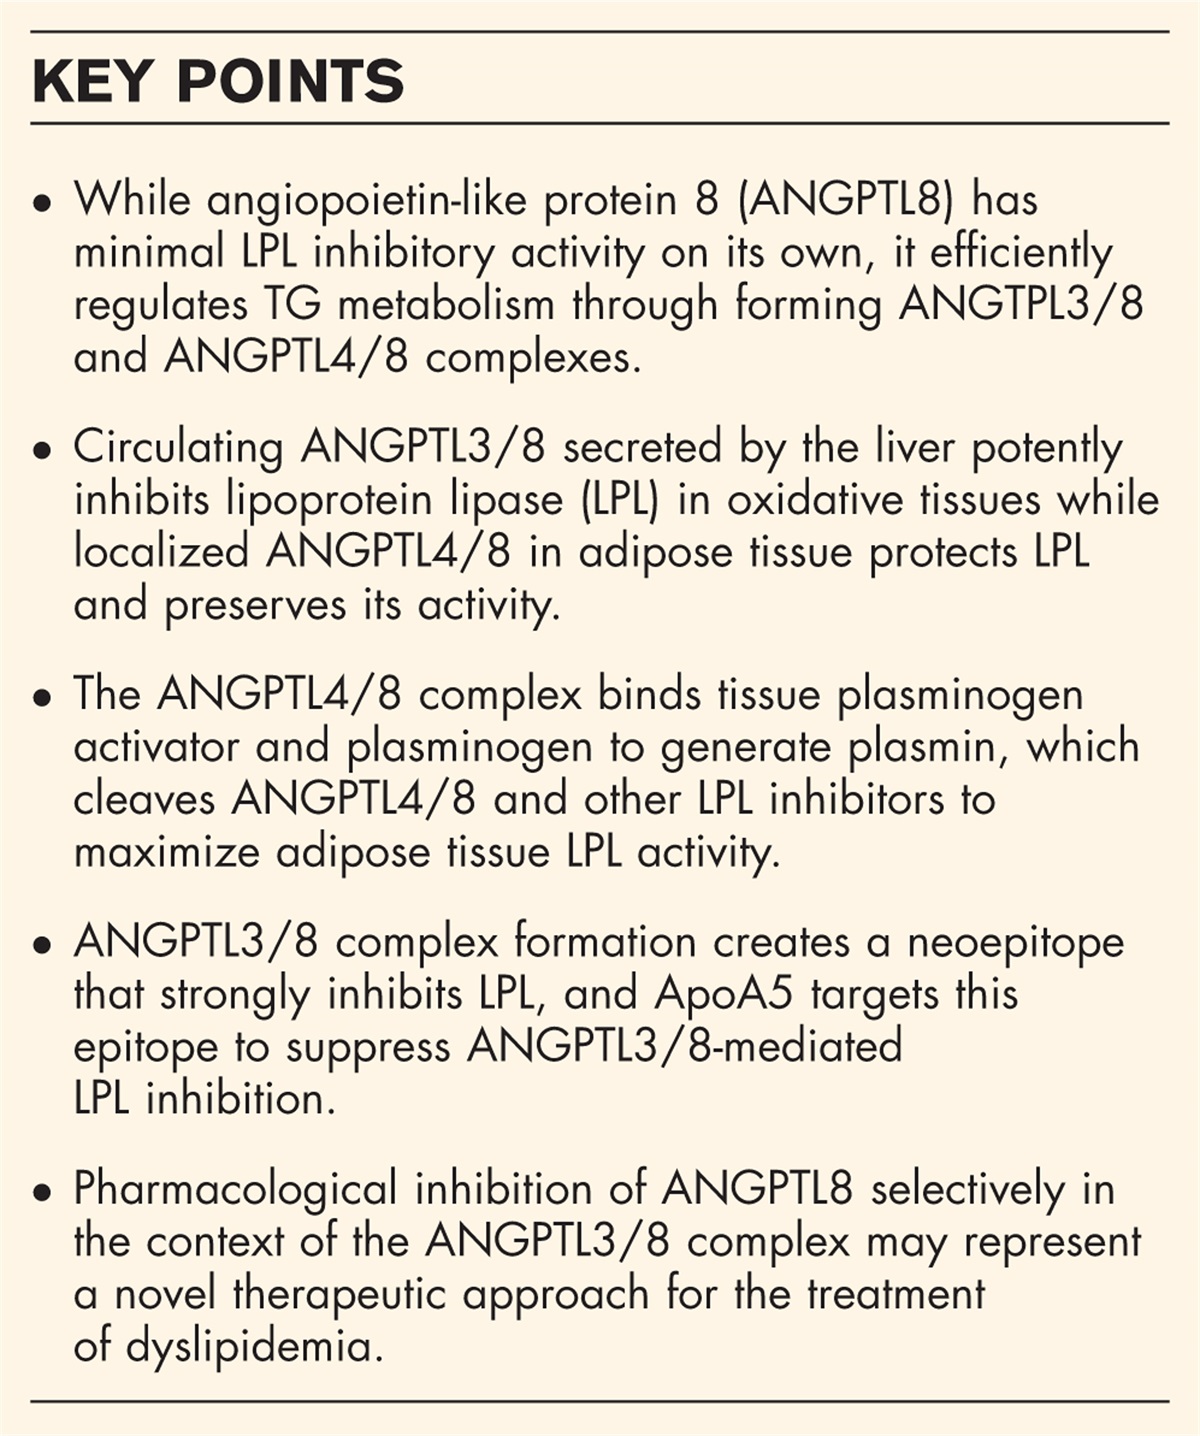 Angiopoietin-like protein 8: a multifaceted protein instrumental in regulating triglyceride metabolism